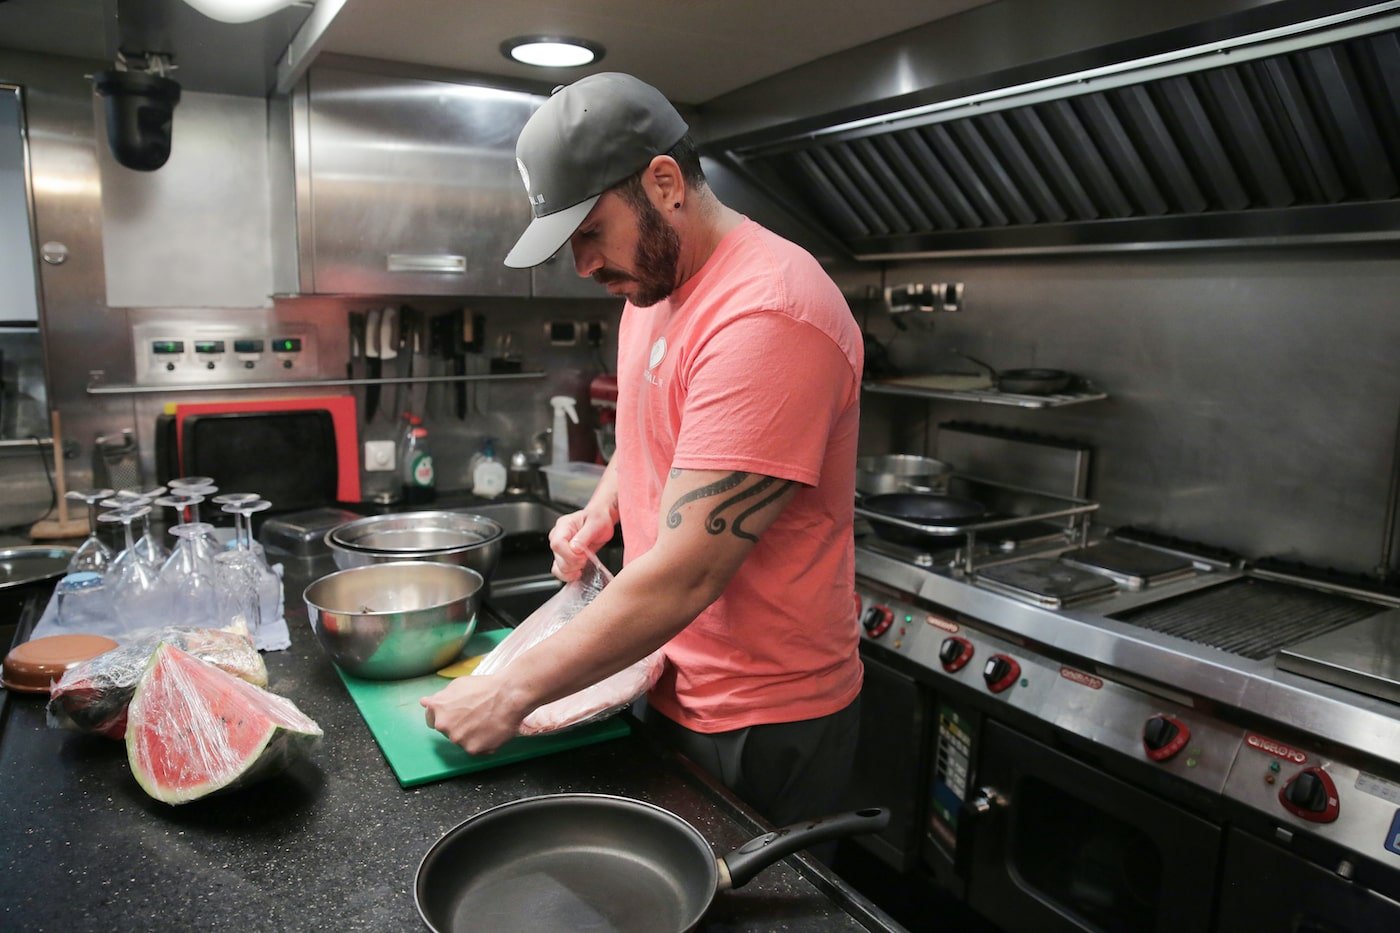 Chef Marcos Spaziani from 'Below Deck Sailing Yacht' opens food in the galley